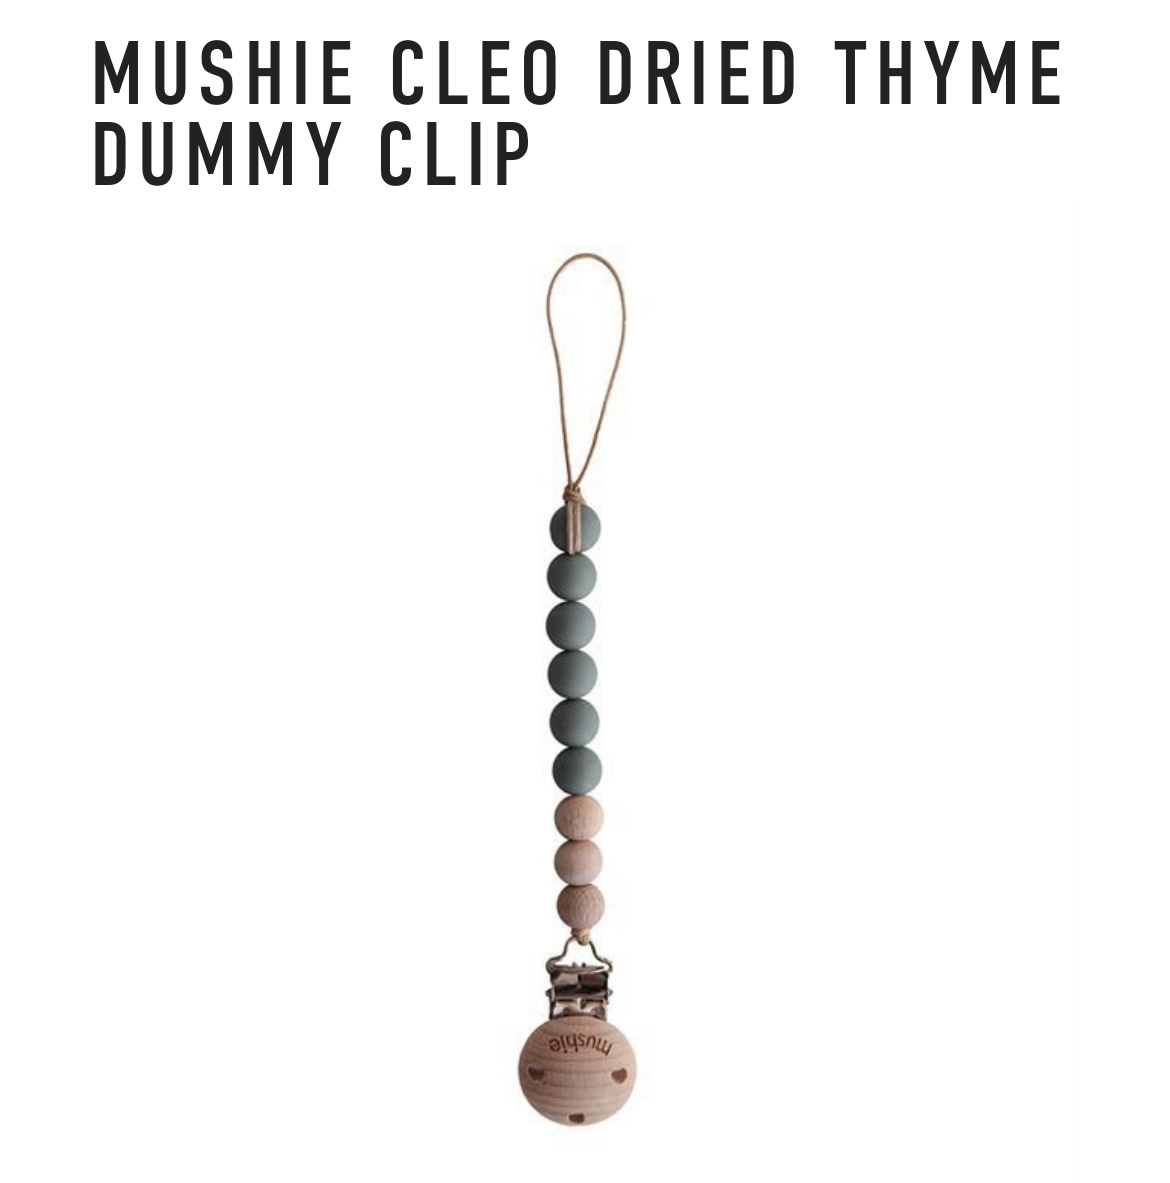 MUSHIE CLEO DRIED THYME DUMMY CLIP